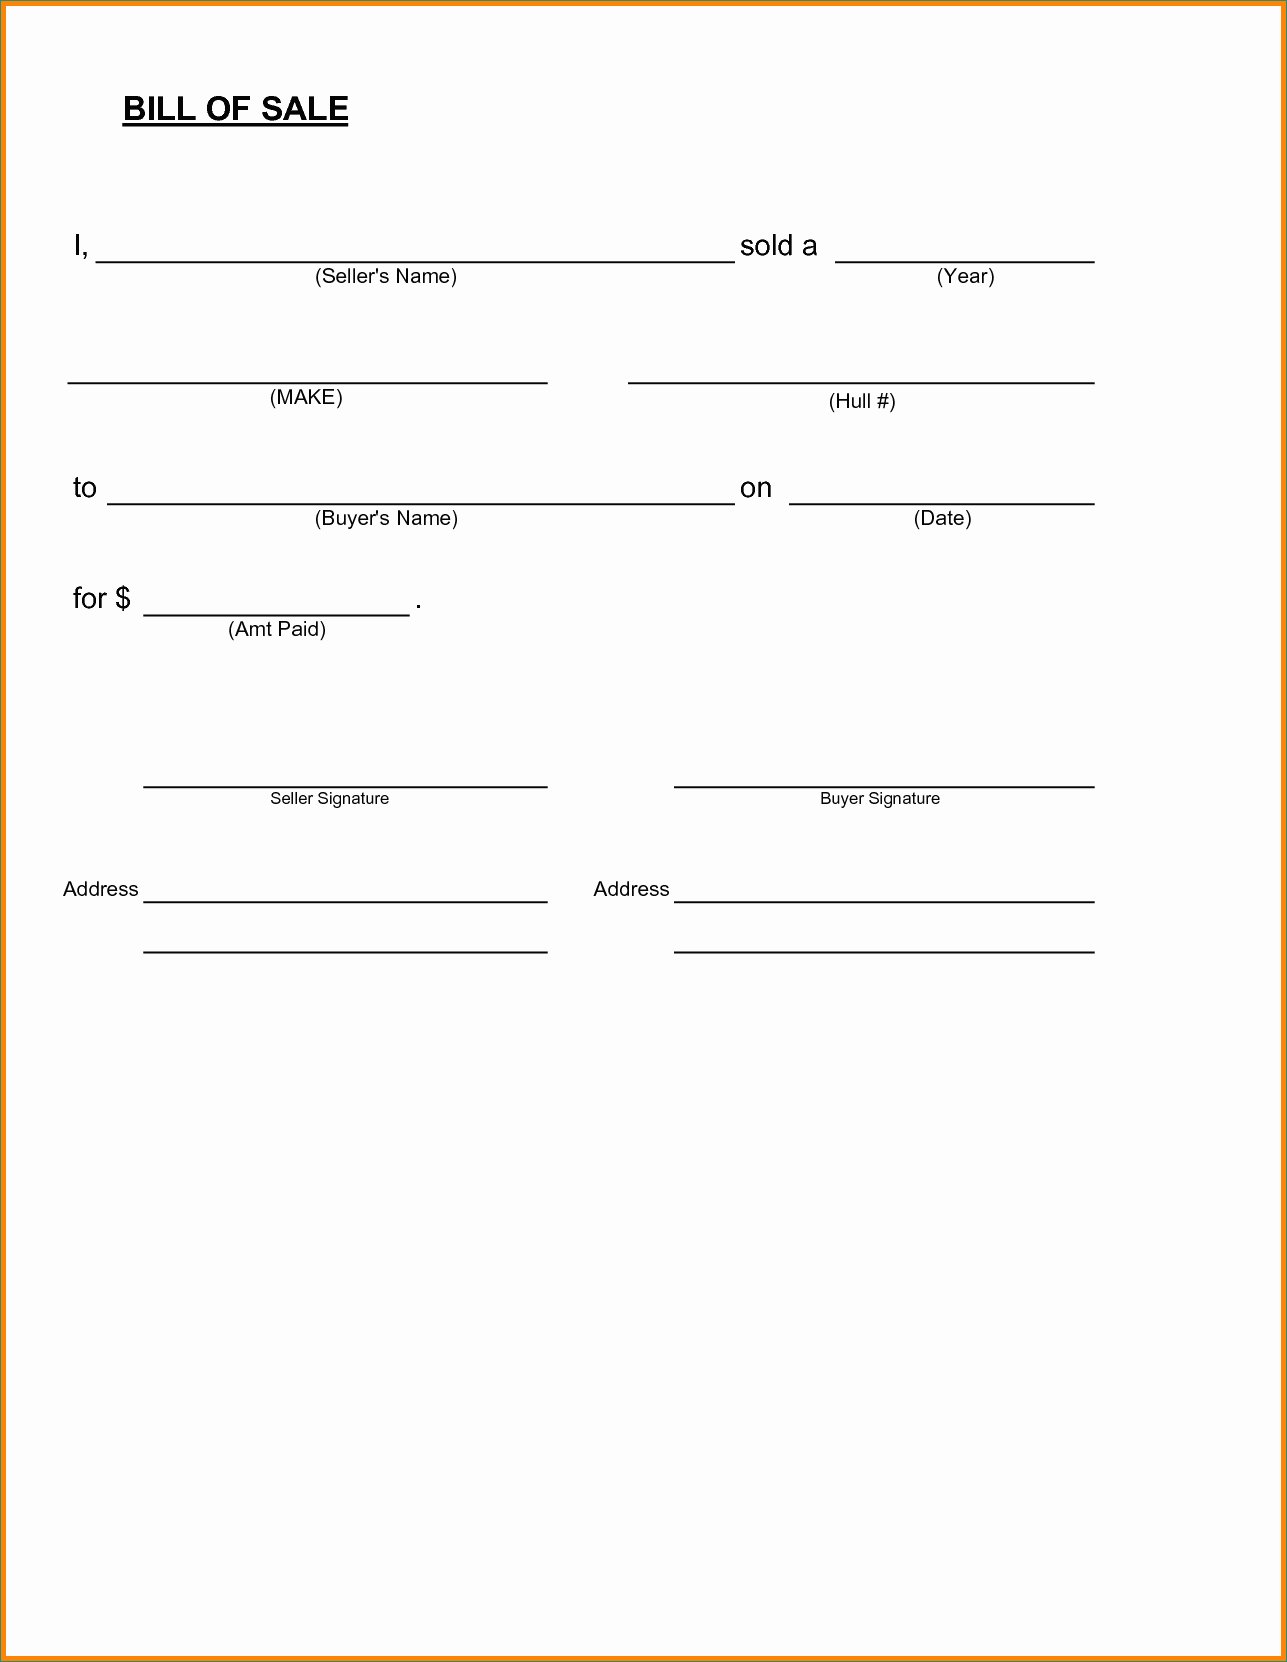 Sample Bill of Sale Form For Boat